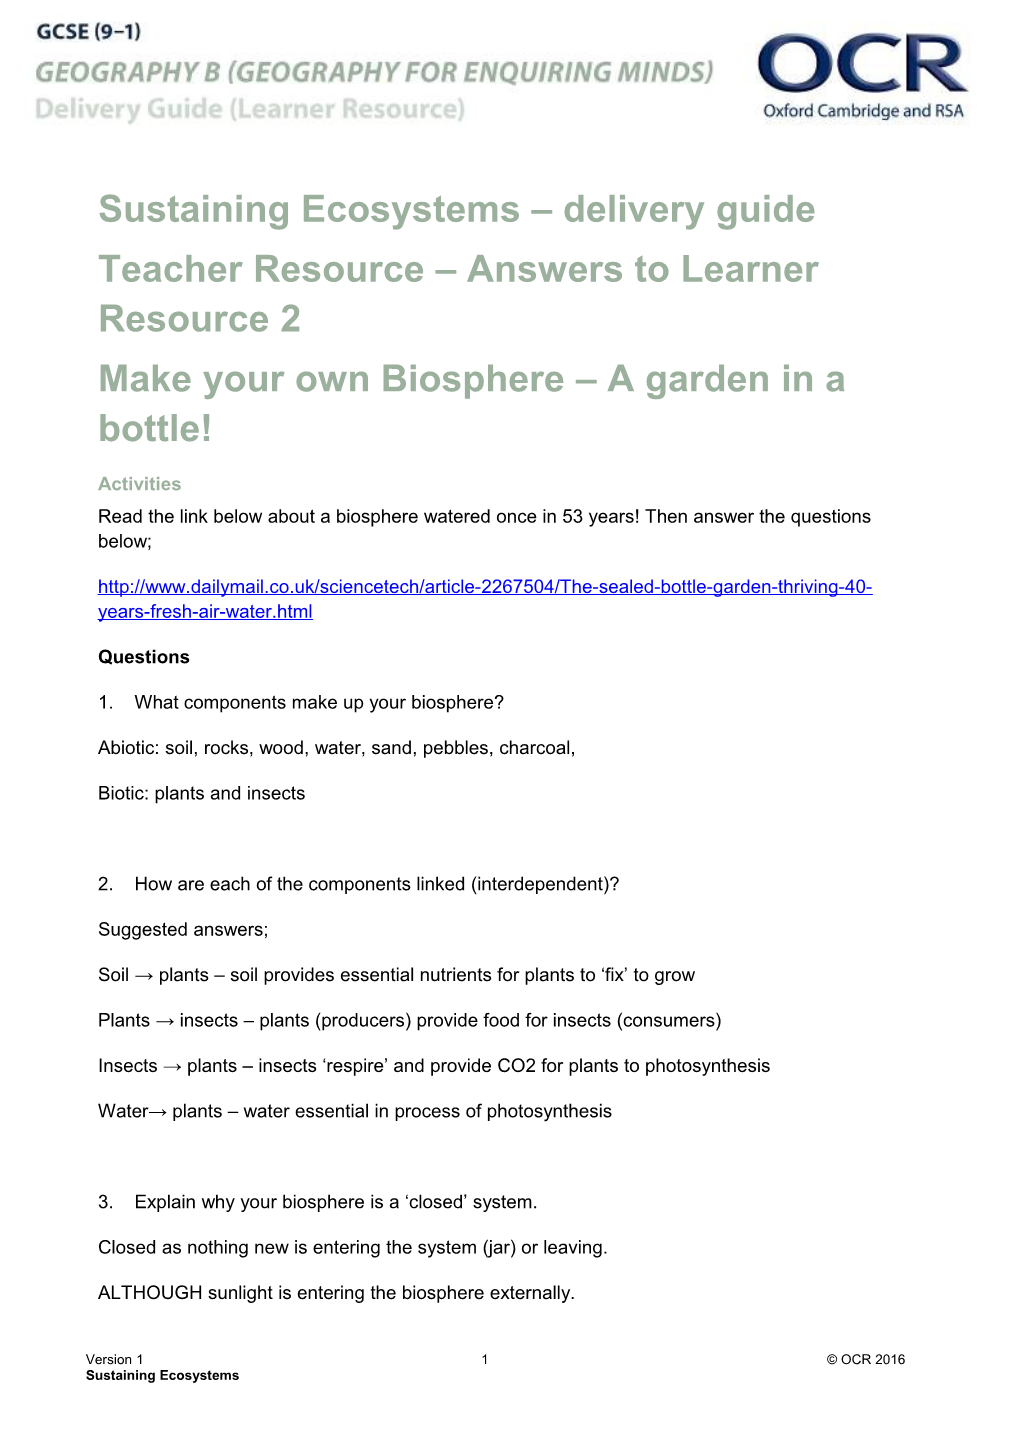 OCR GCSE (9-1) Geography B Delivery Guide Teacher Resource 2 - Answers to Learner Resource